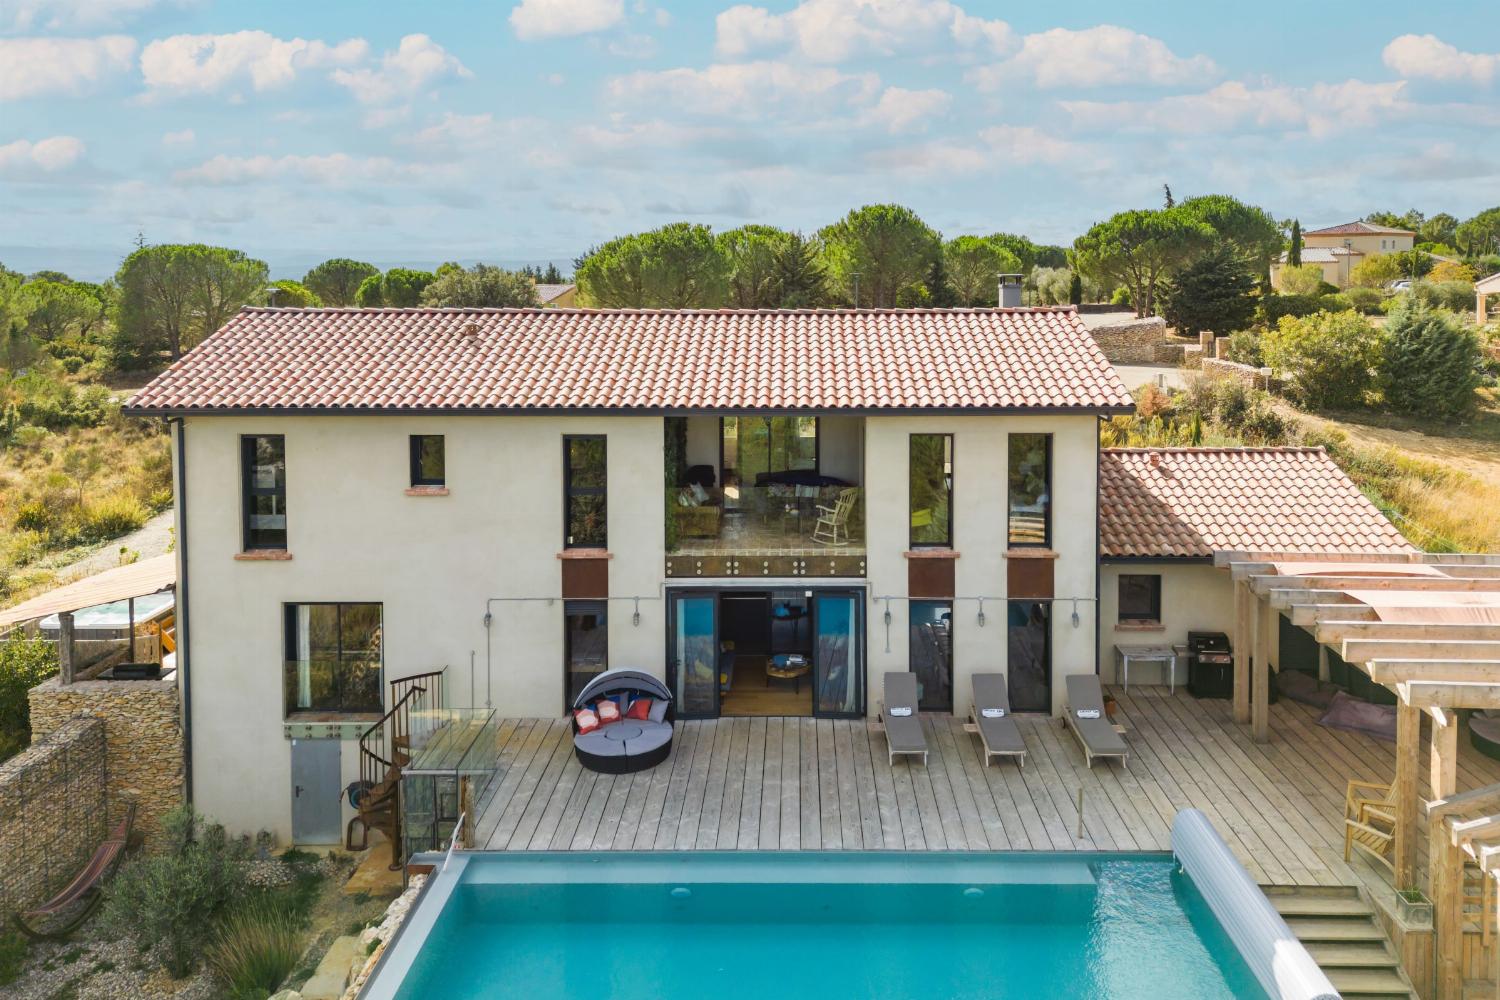 Vacation home in the South of France with private heated infinity pool